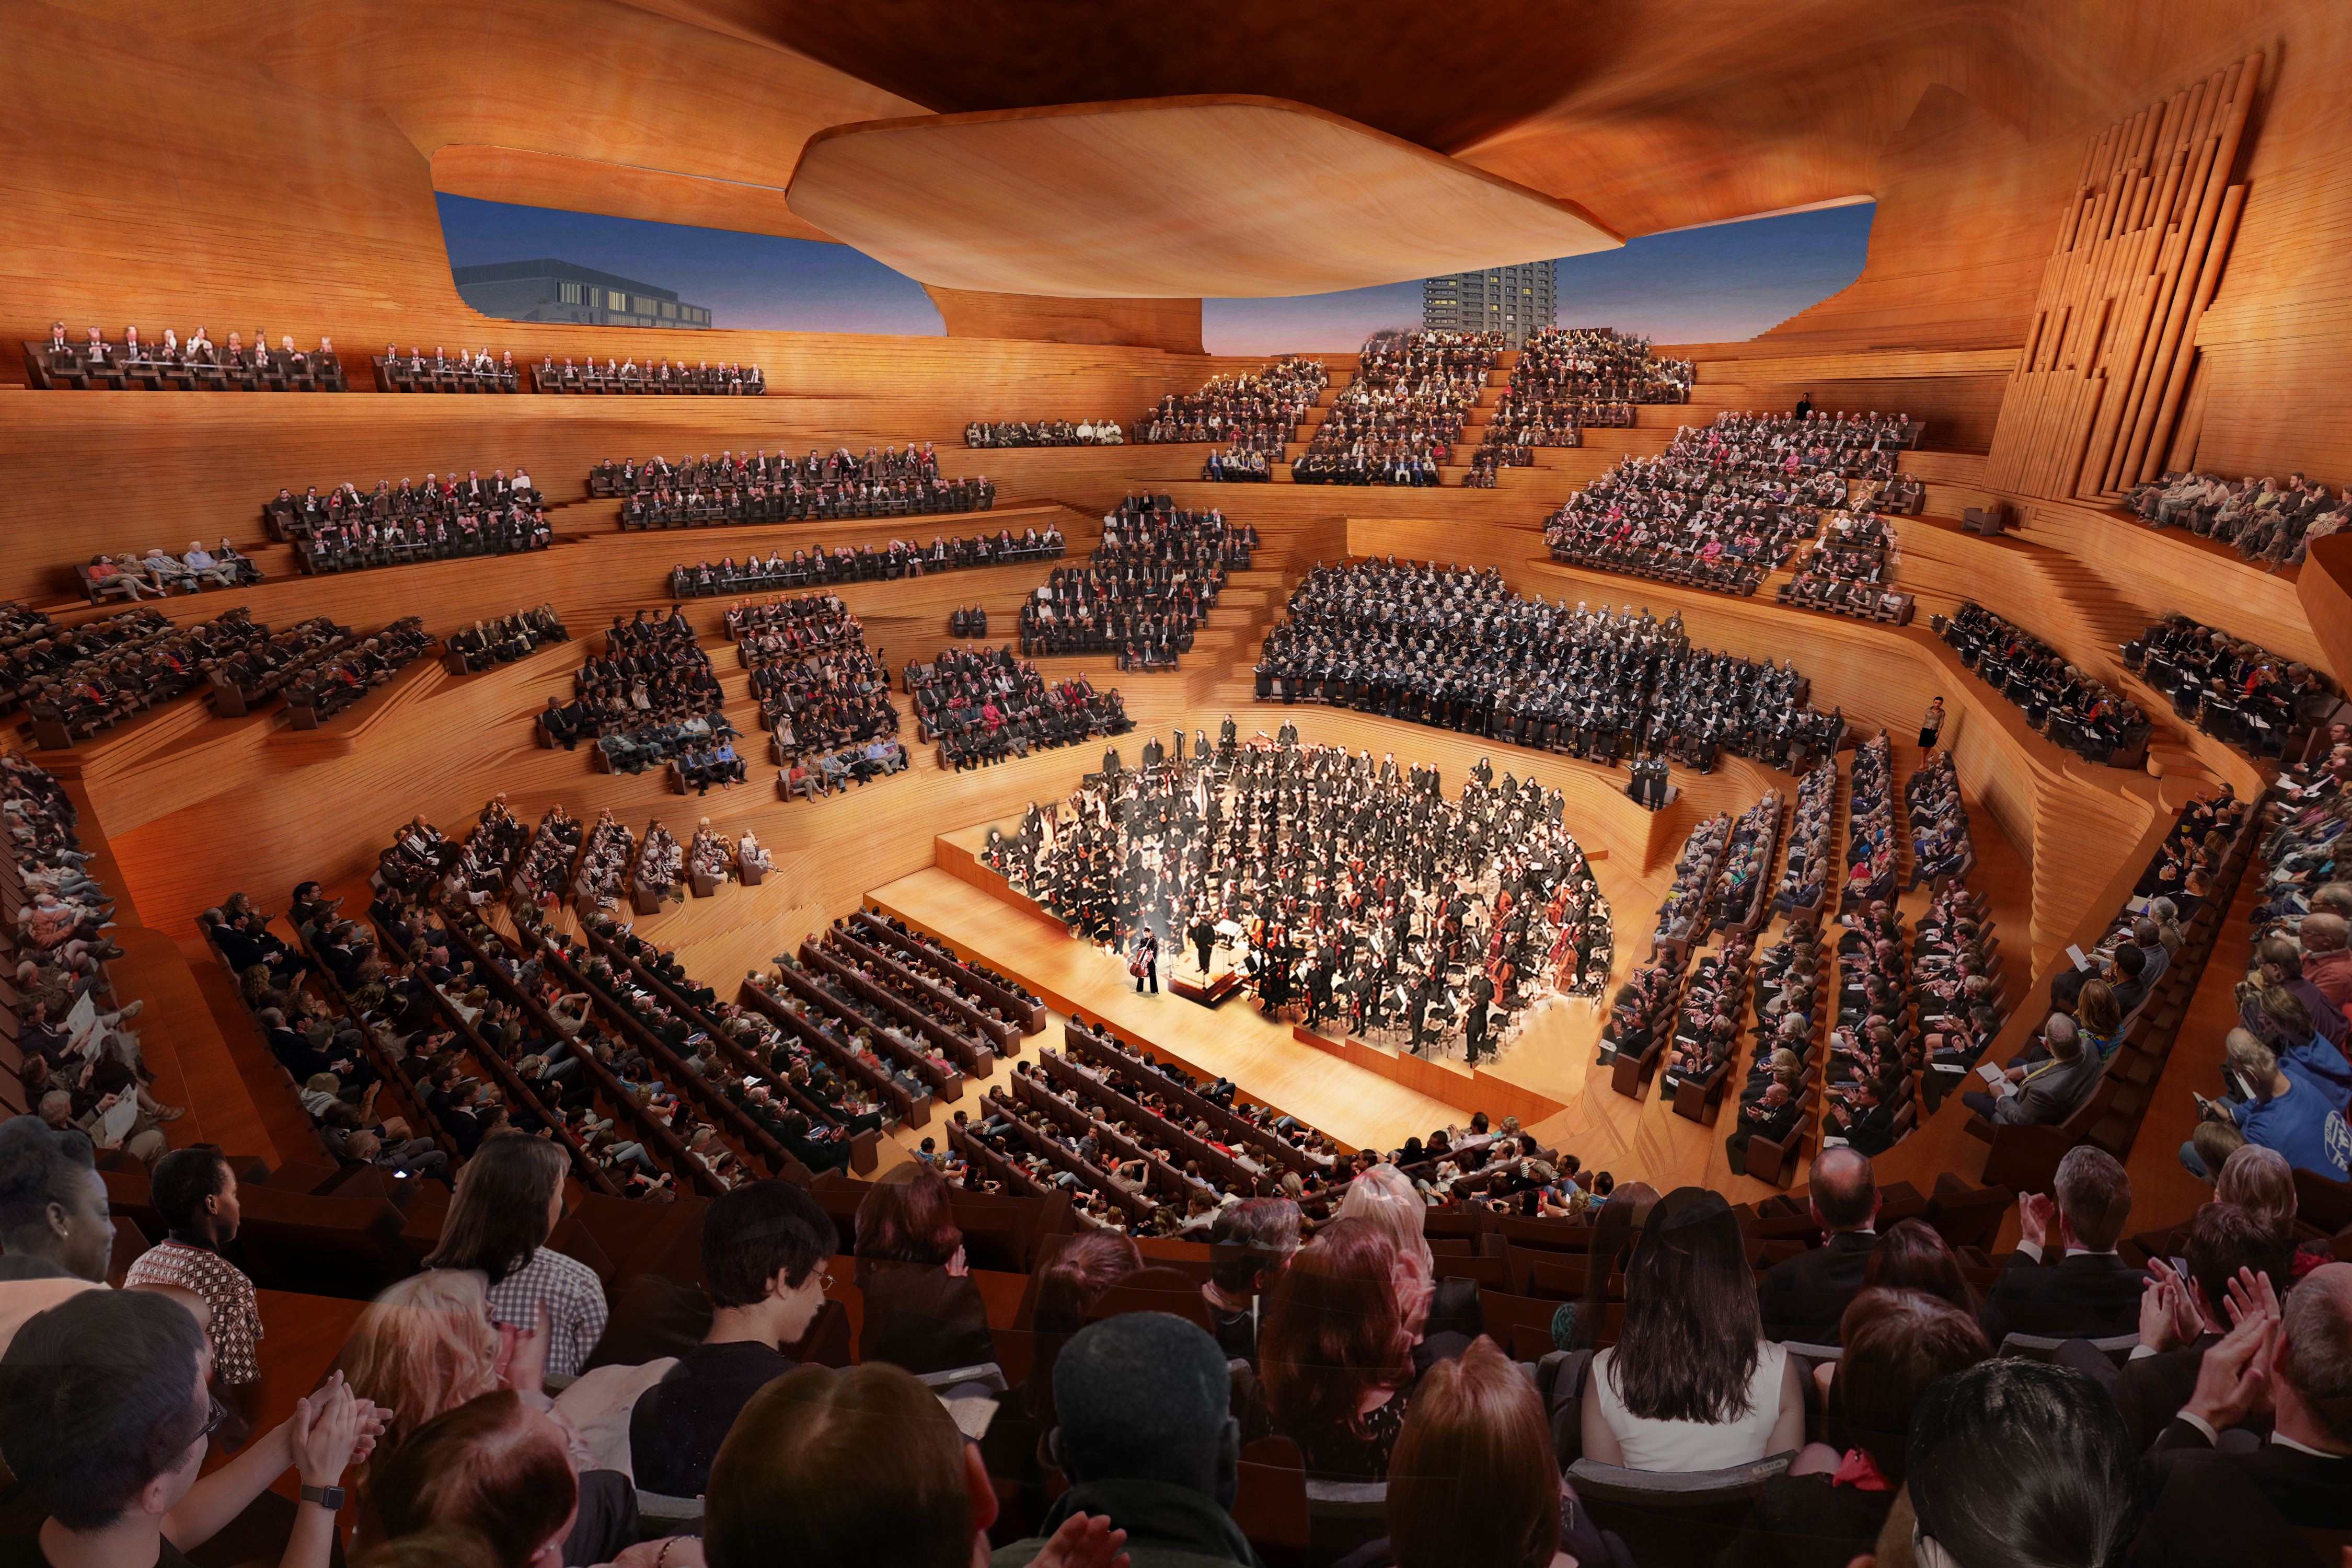 The design concept for the Concert Hall at the Centre For Musi